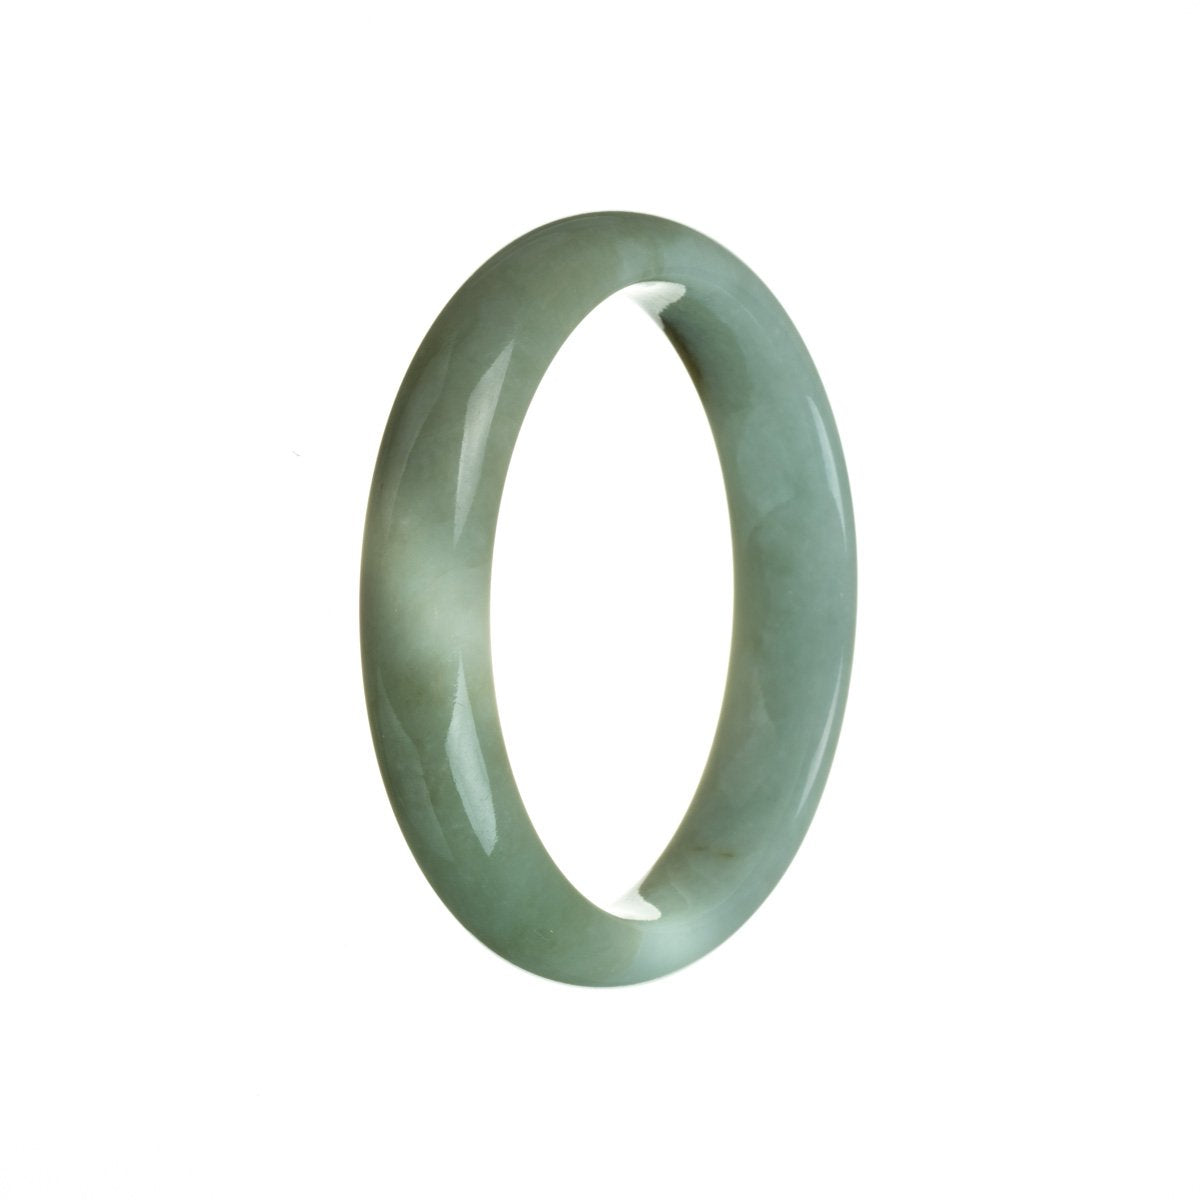 A half moon-shaped green jade bangle bracelet made of real natural jadeite, measuring 56mm in size. Designed by MAYS.